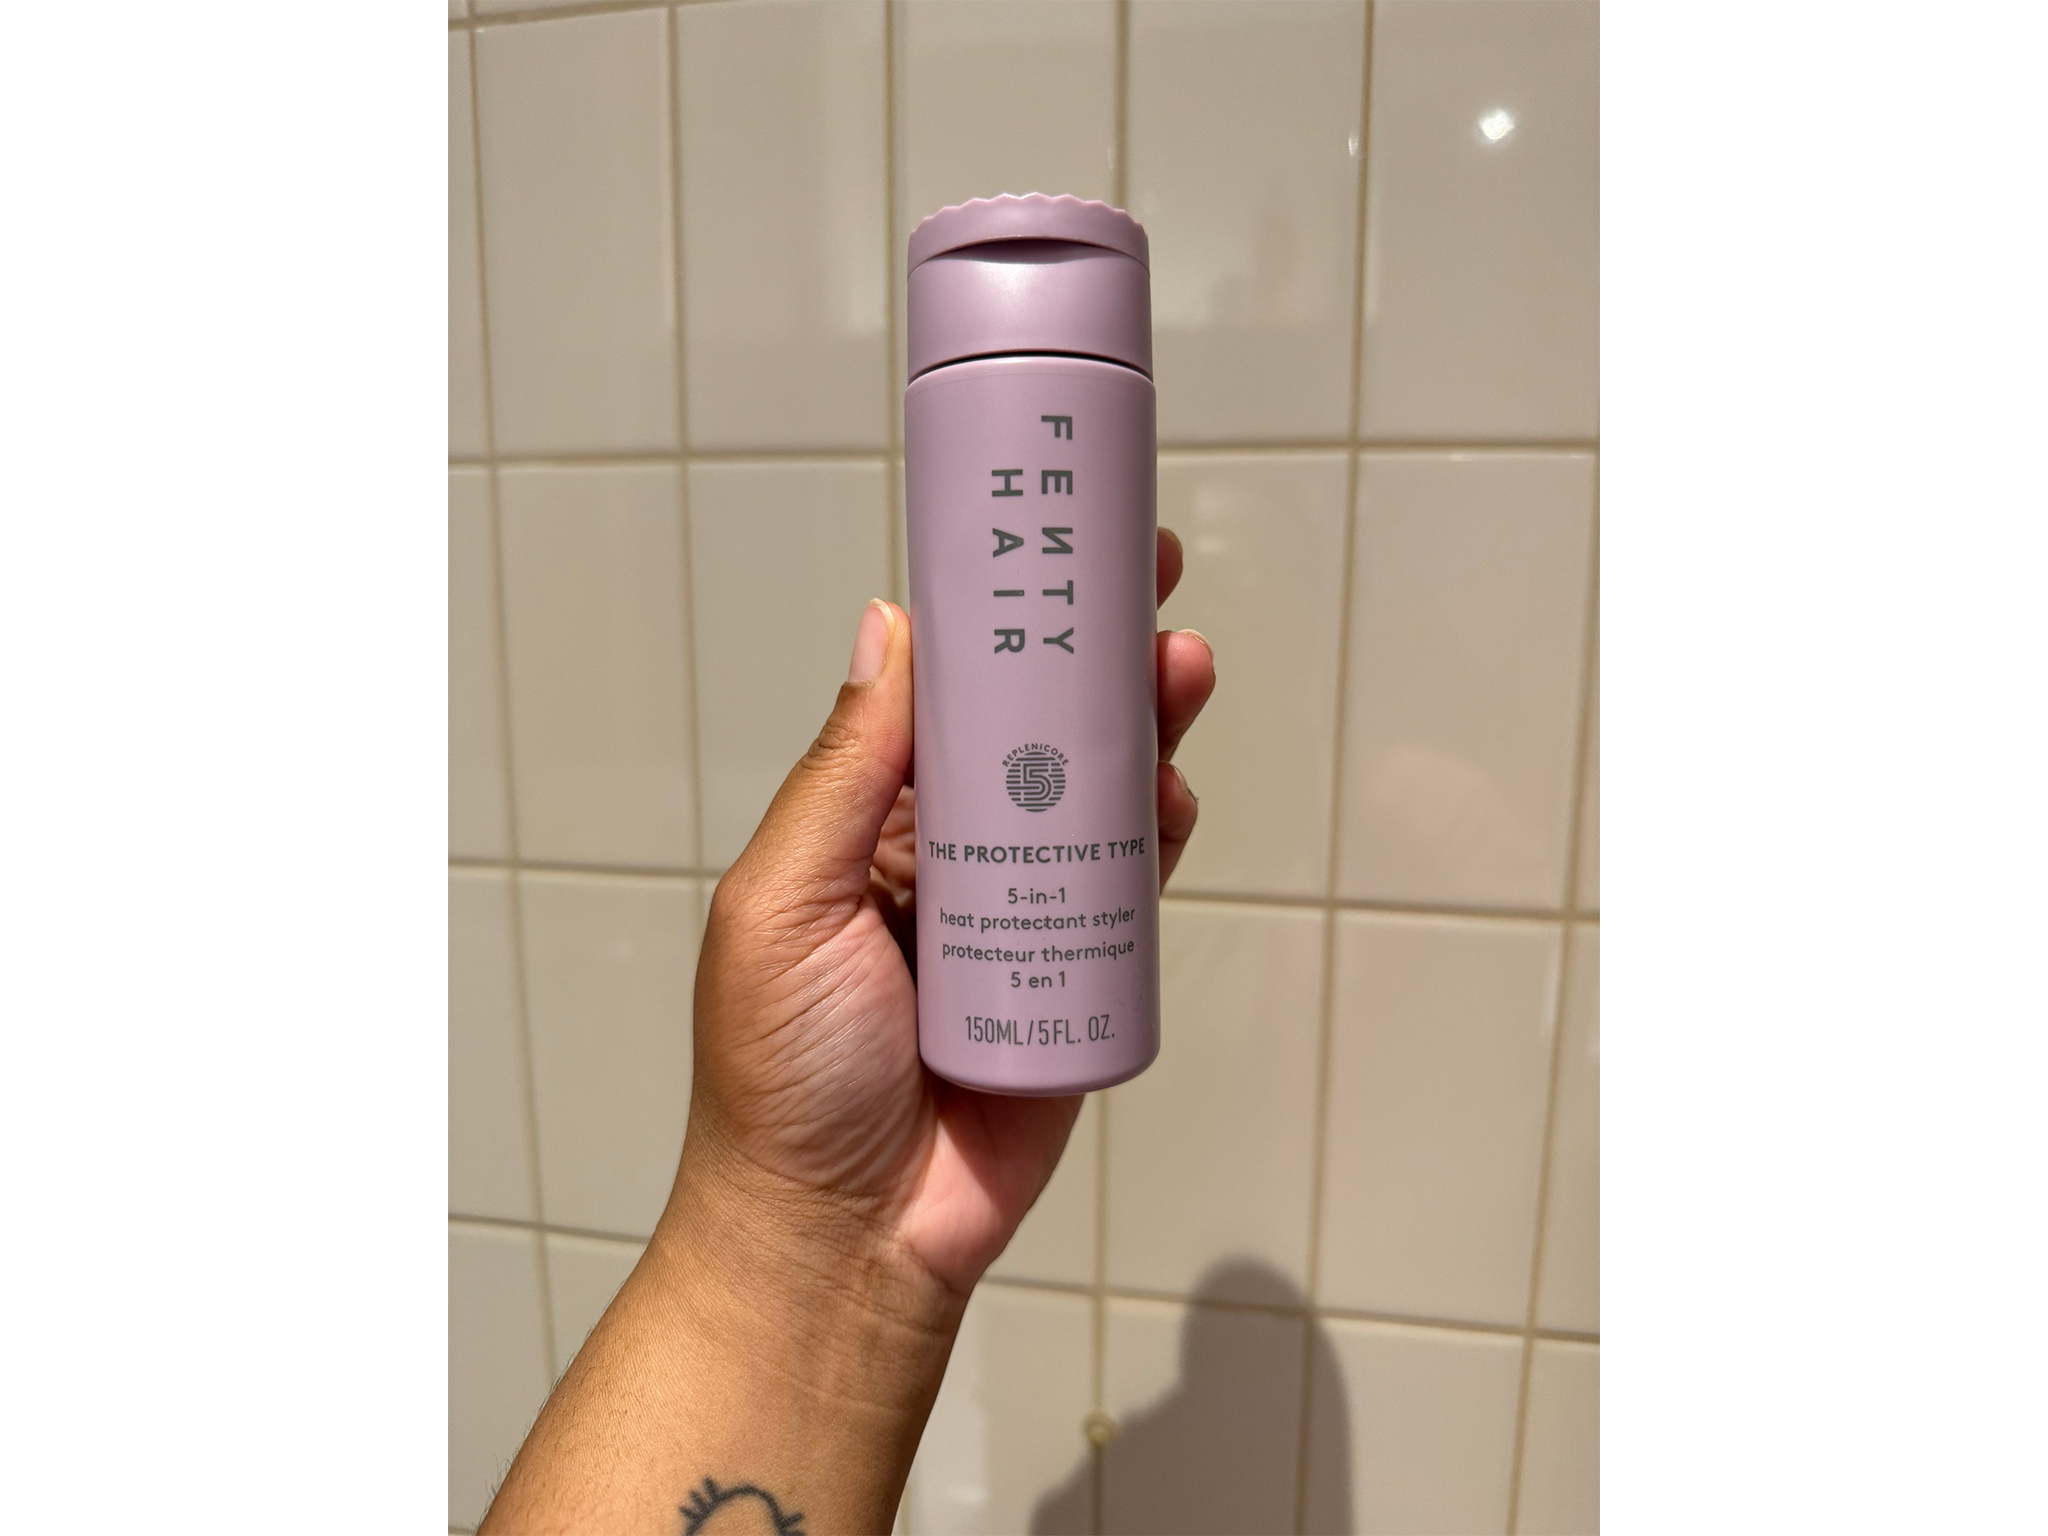 Fenty Hair indybest review Fenty Hair the protective type 5-in-1 heat protectant styler